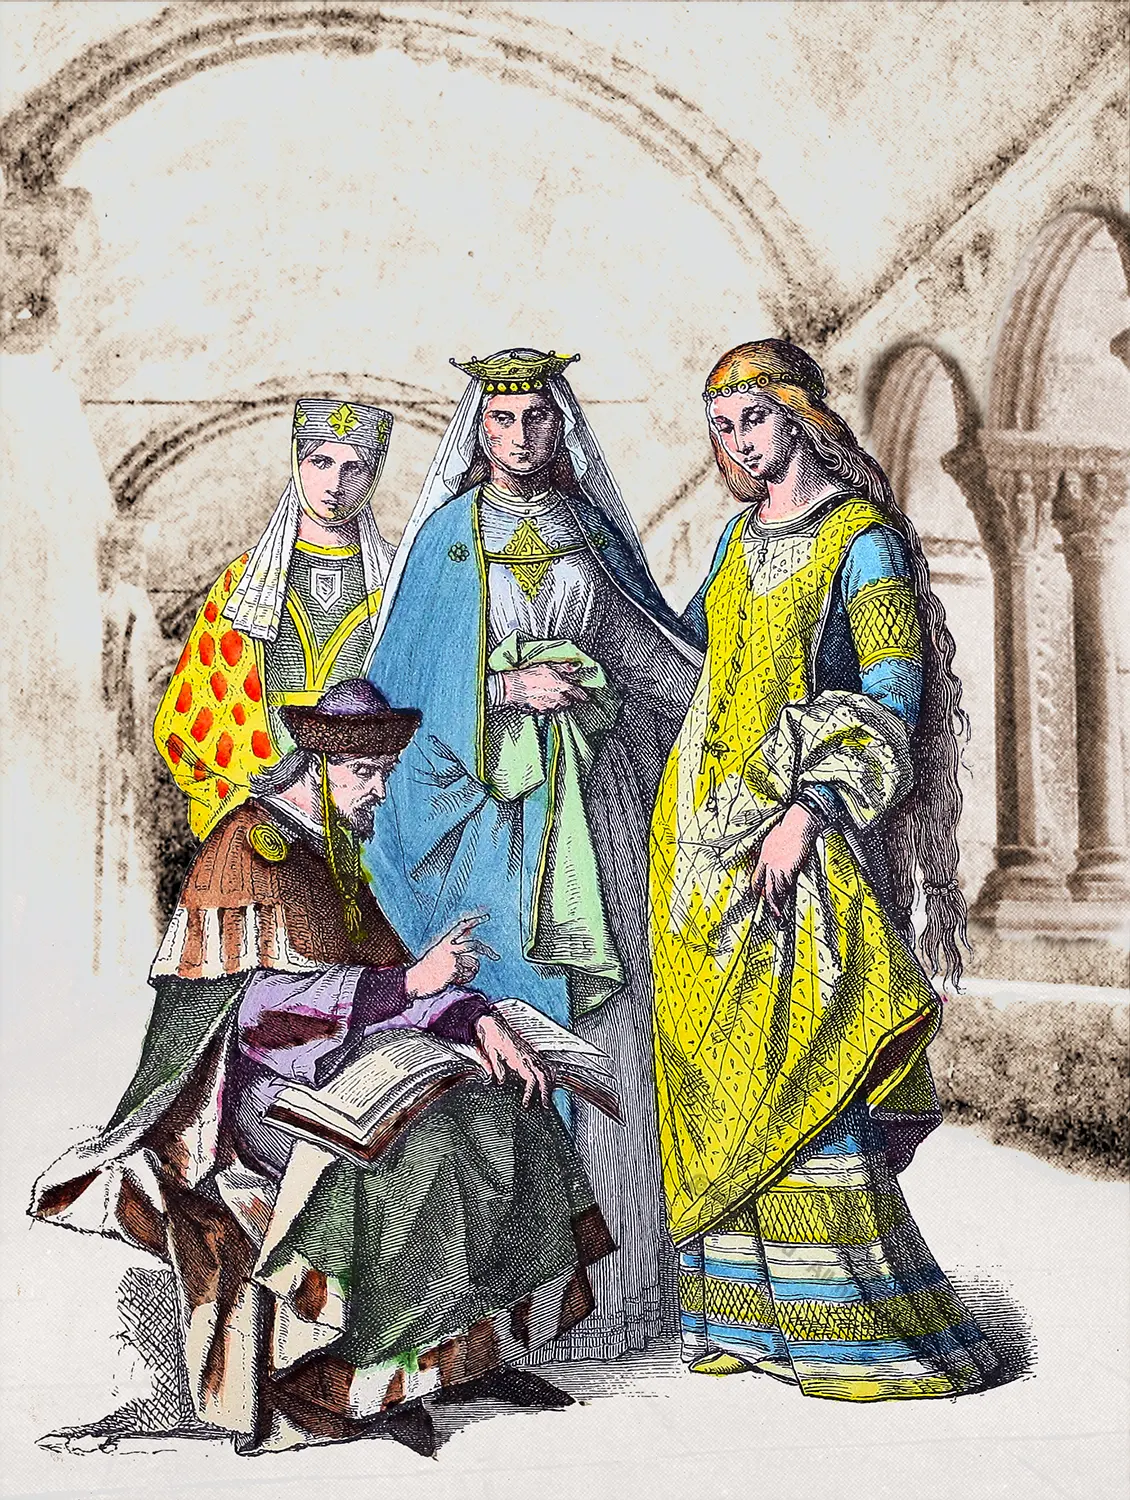 Medieval Garb of German Noble Ladies and a Duke, 13th century.